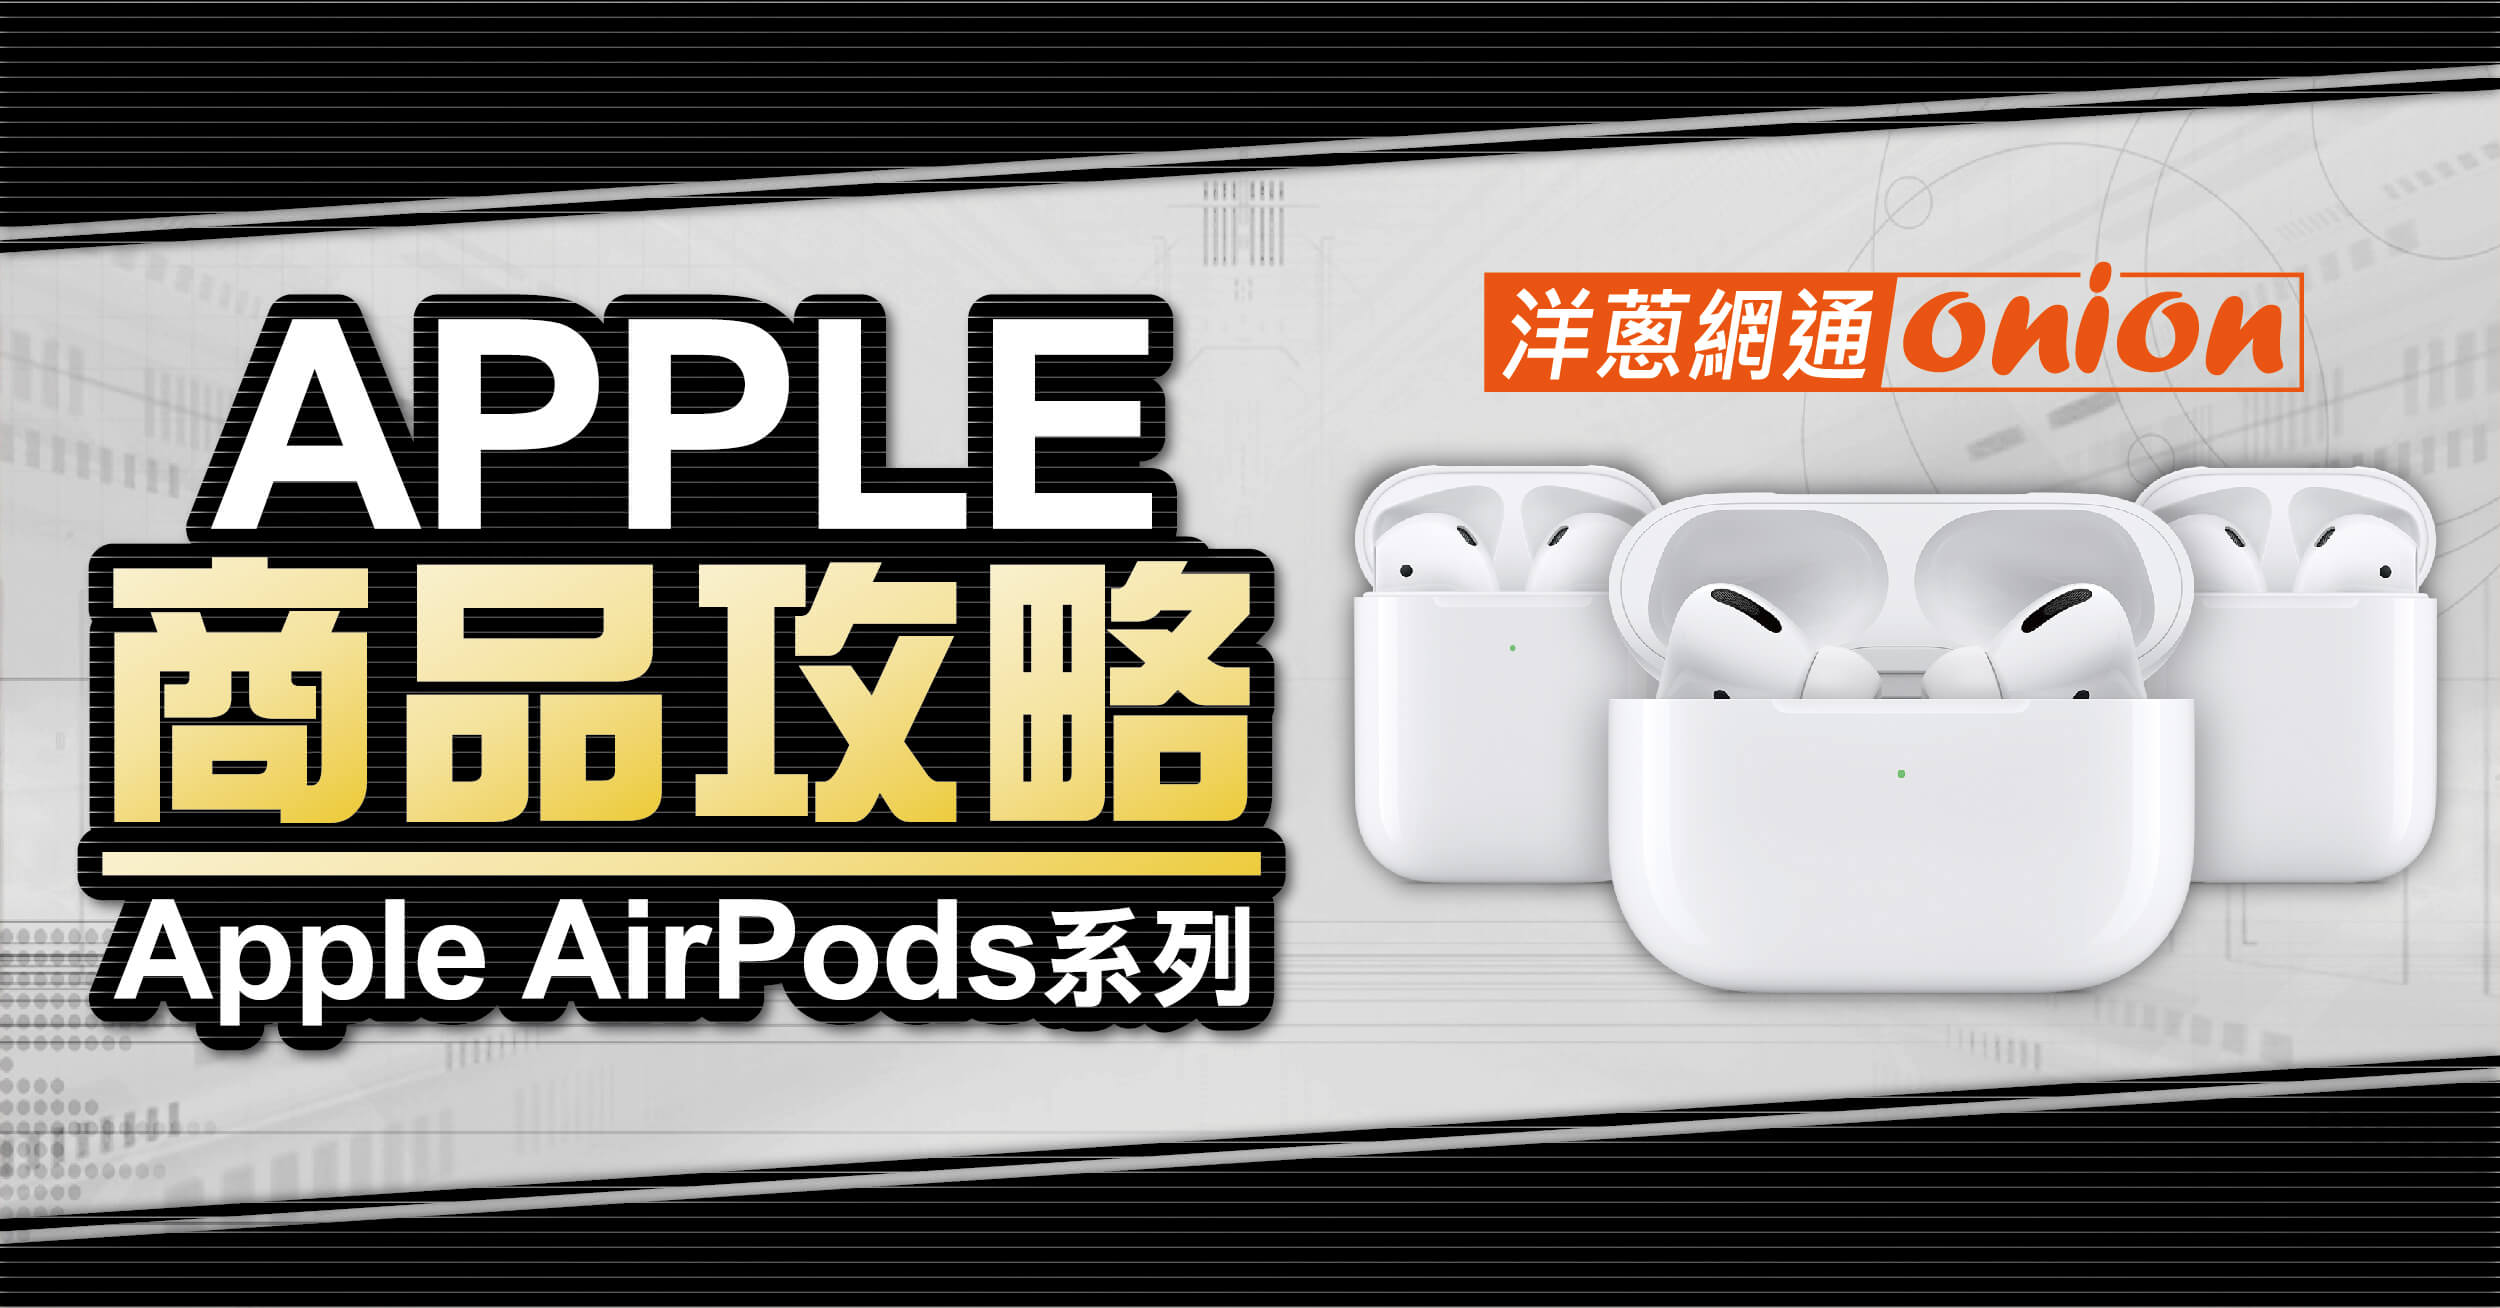 AirPods Pro 2、AirPods 3代該買哪一款？各系列 AirPods 比較功能差異